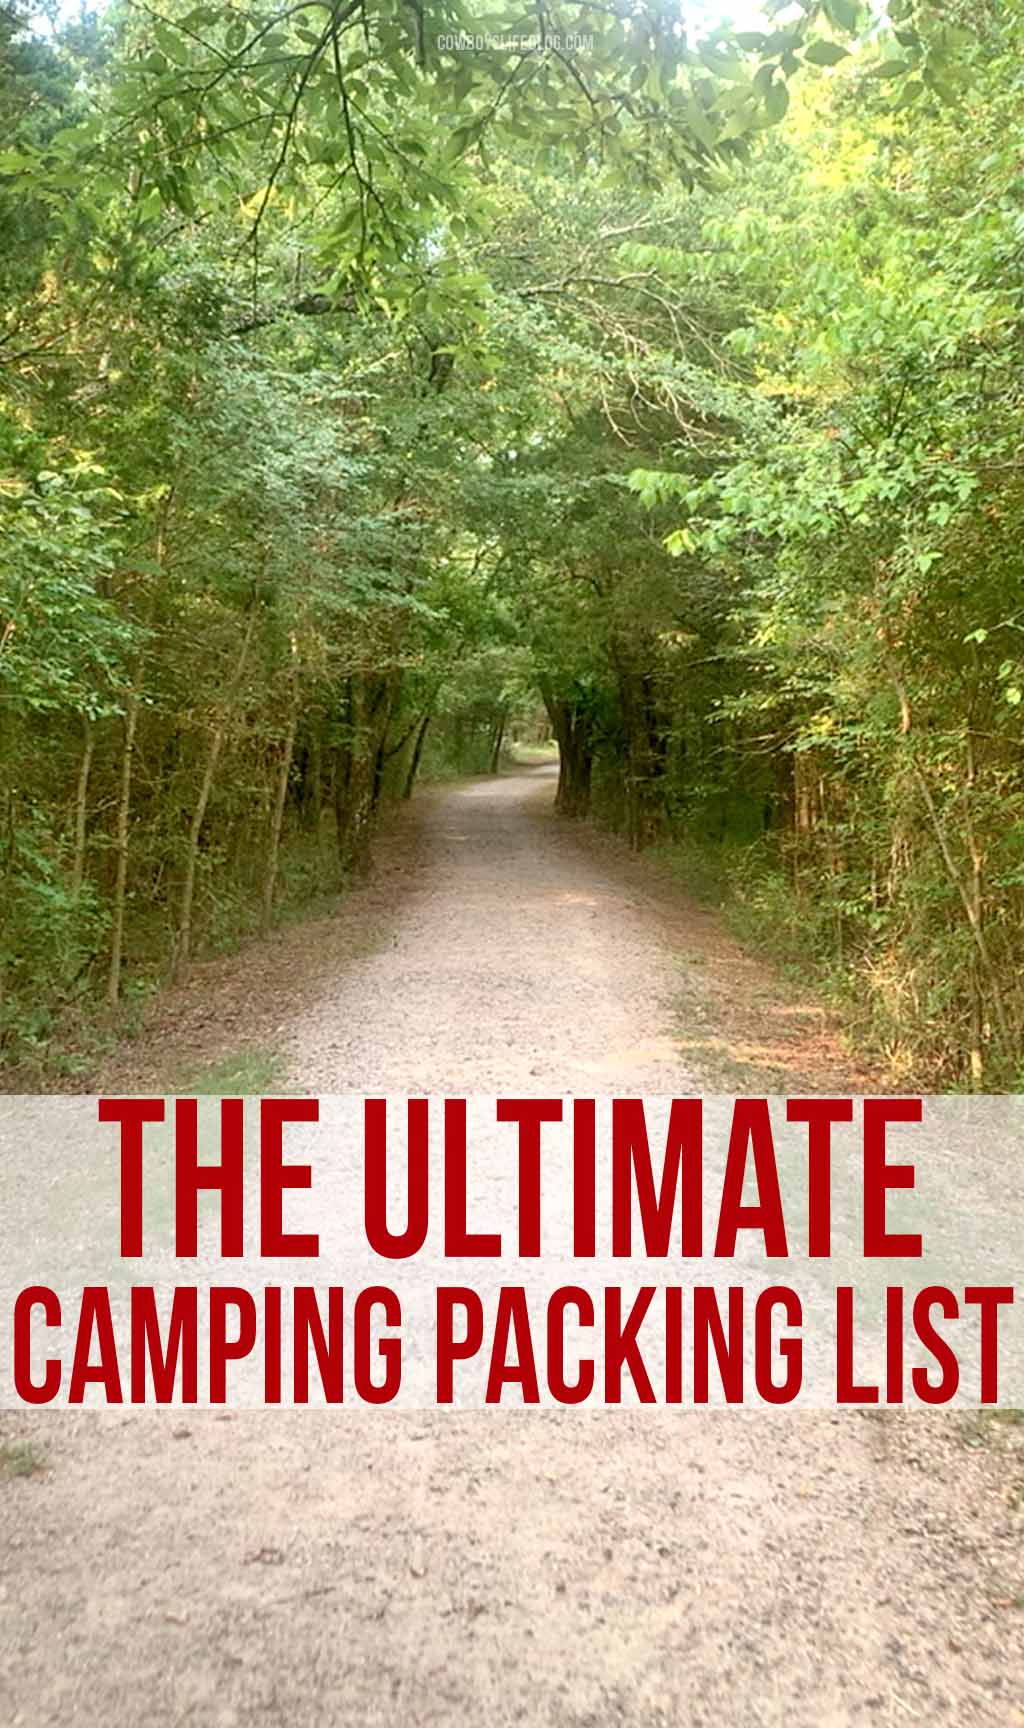 The Ultimate Camping Packing List